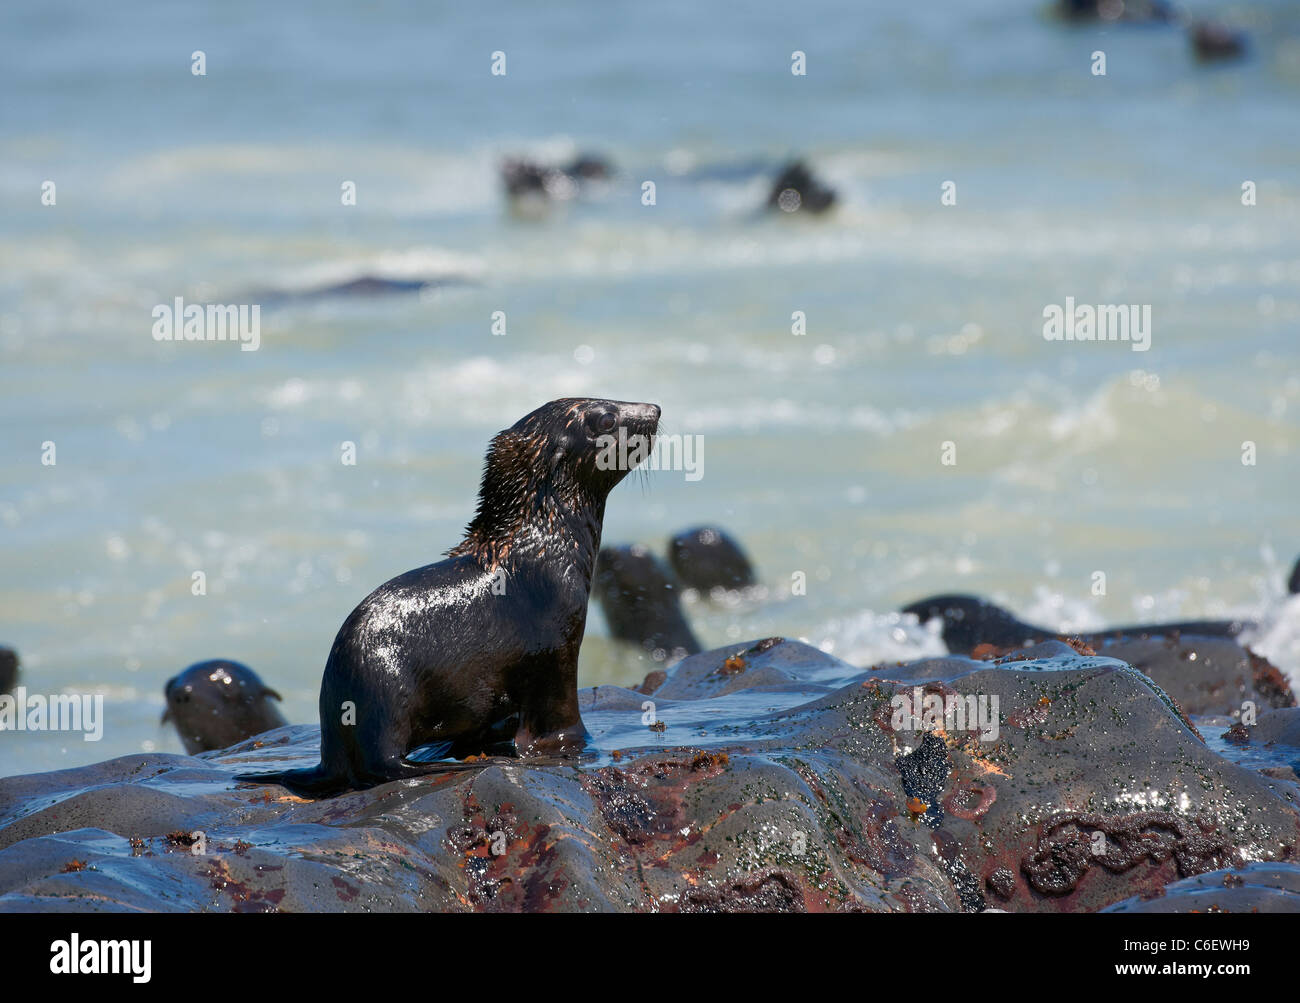 youngster in colony of Brown fur seals, Arctocephalus pusillus, Cape Cross on the Skeleton Coast of Namibia, Africa Stock Photo